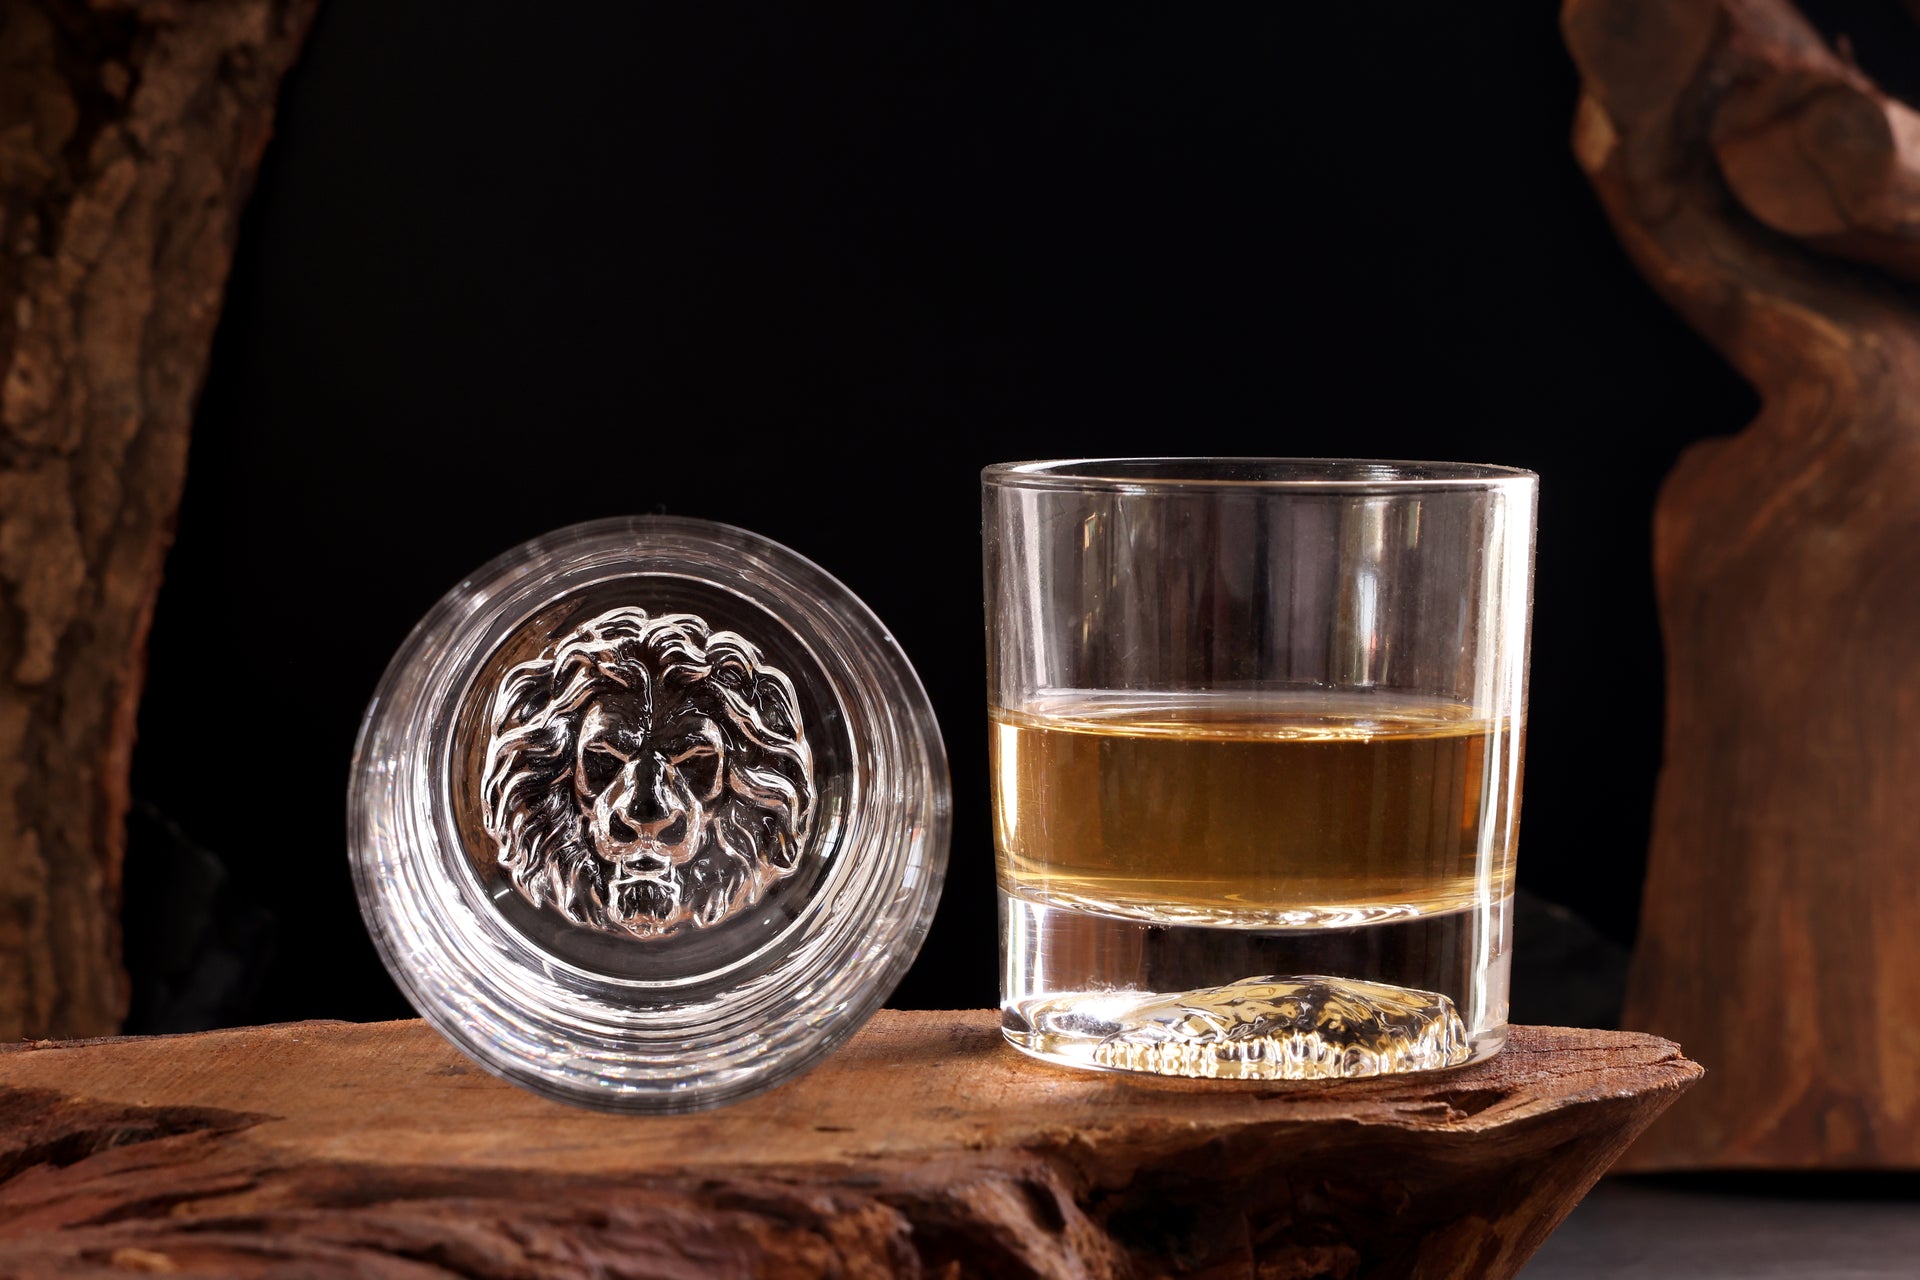 There's a Lion Inside - Double walled whiskey glass